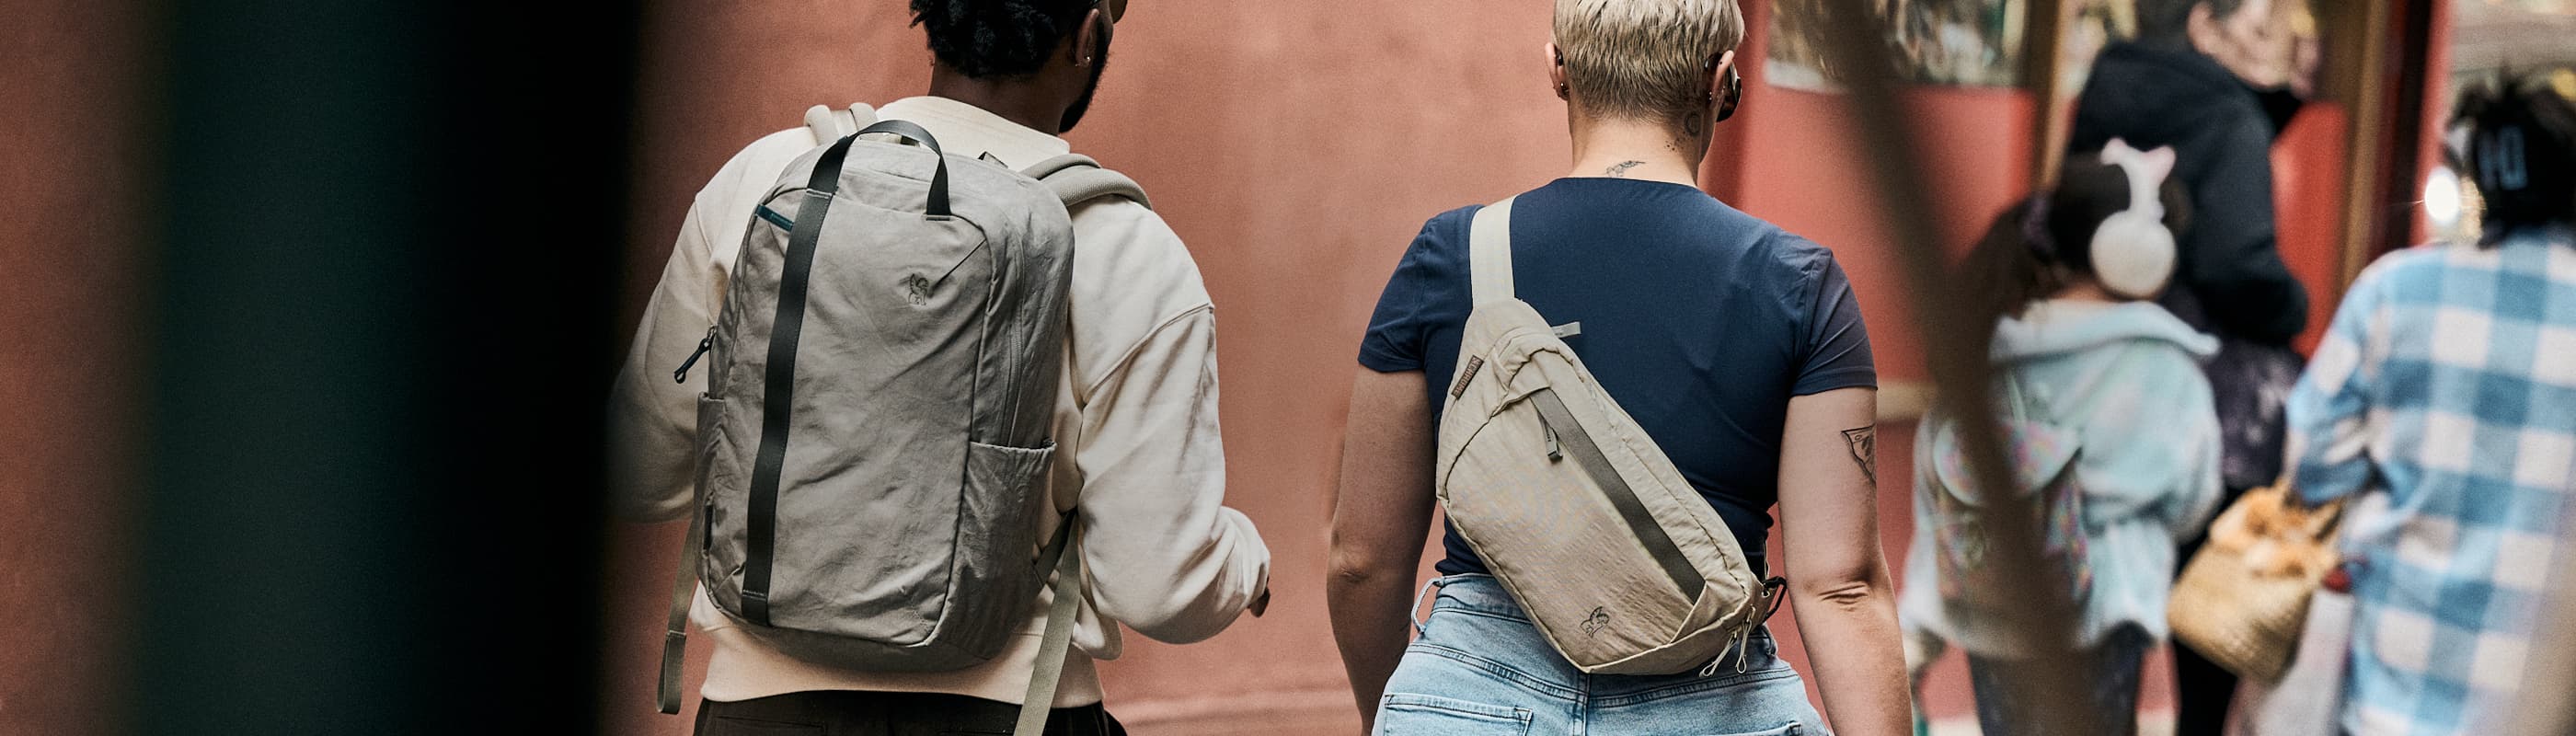 A woman wearing a district sling and a man wearing a backpack